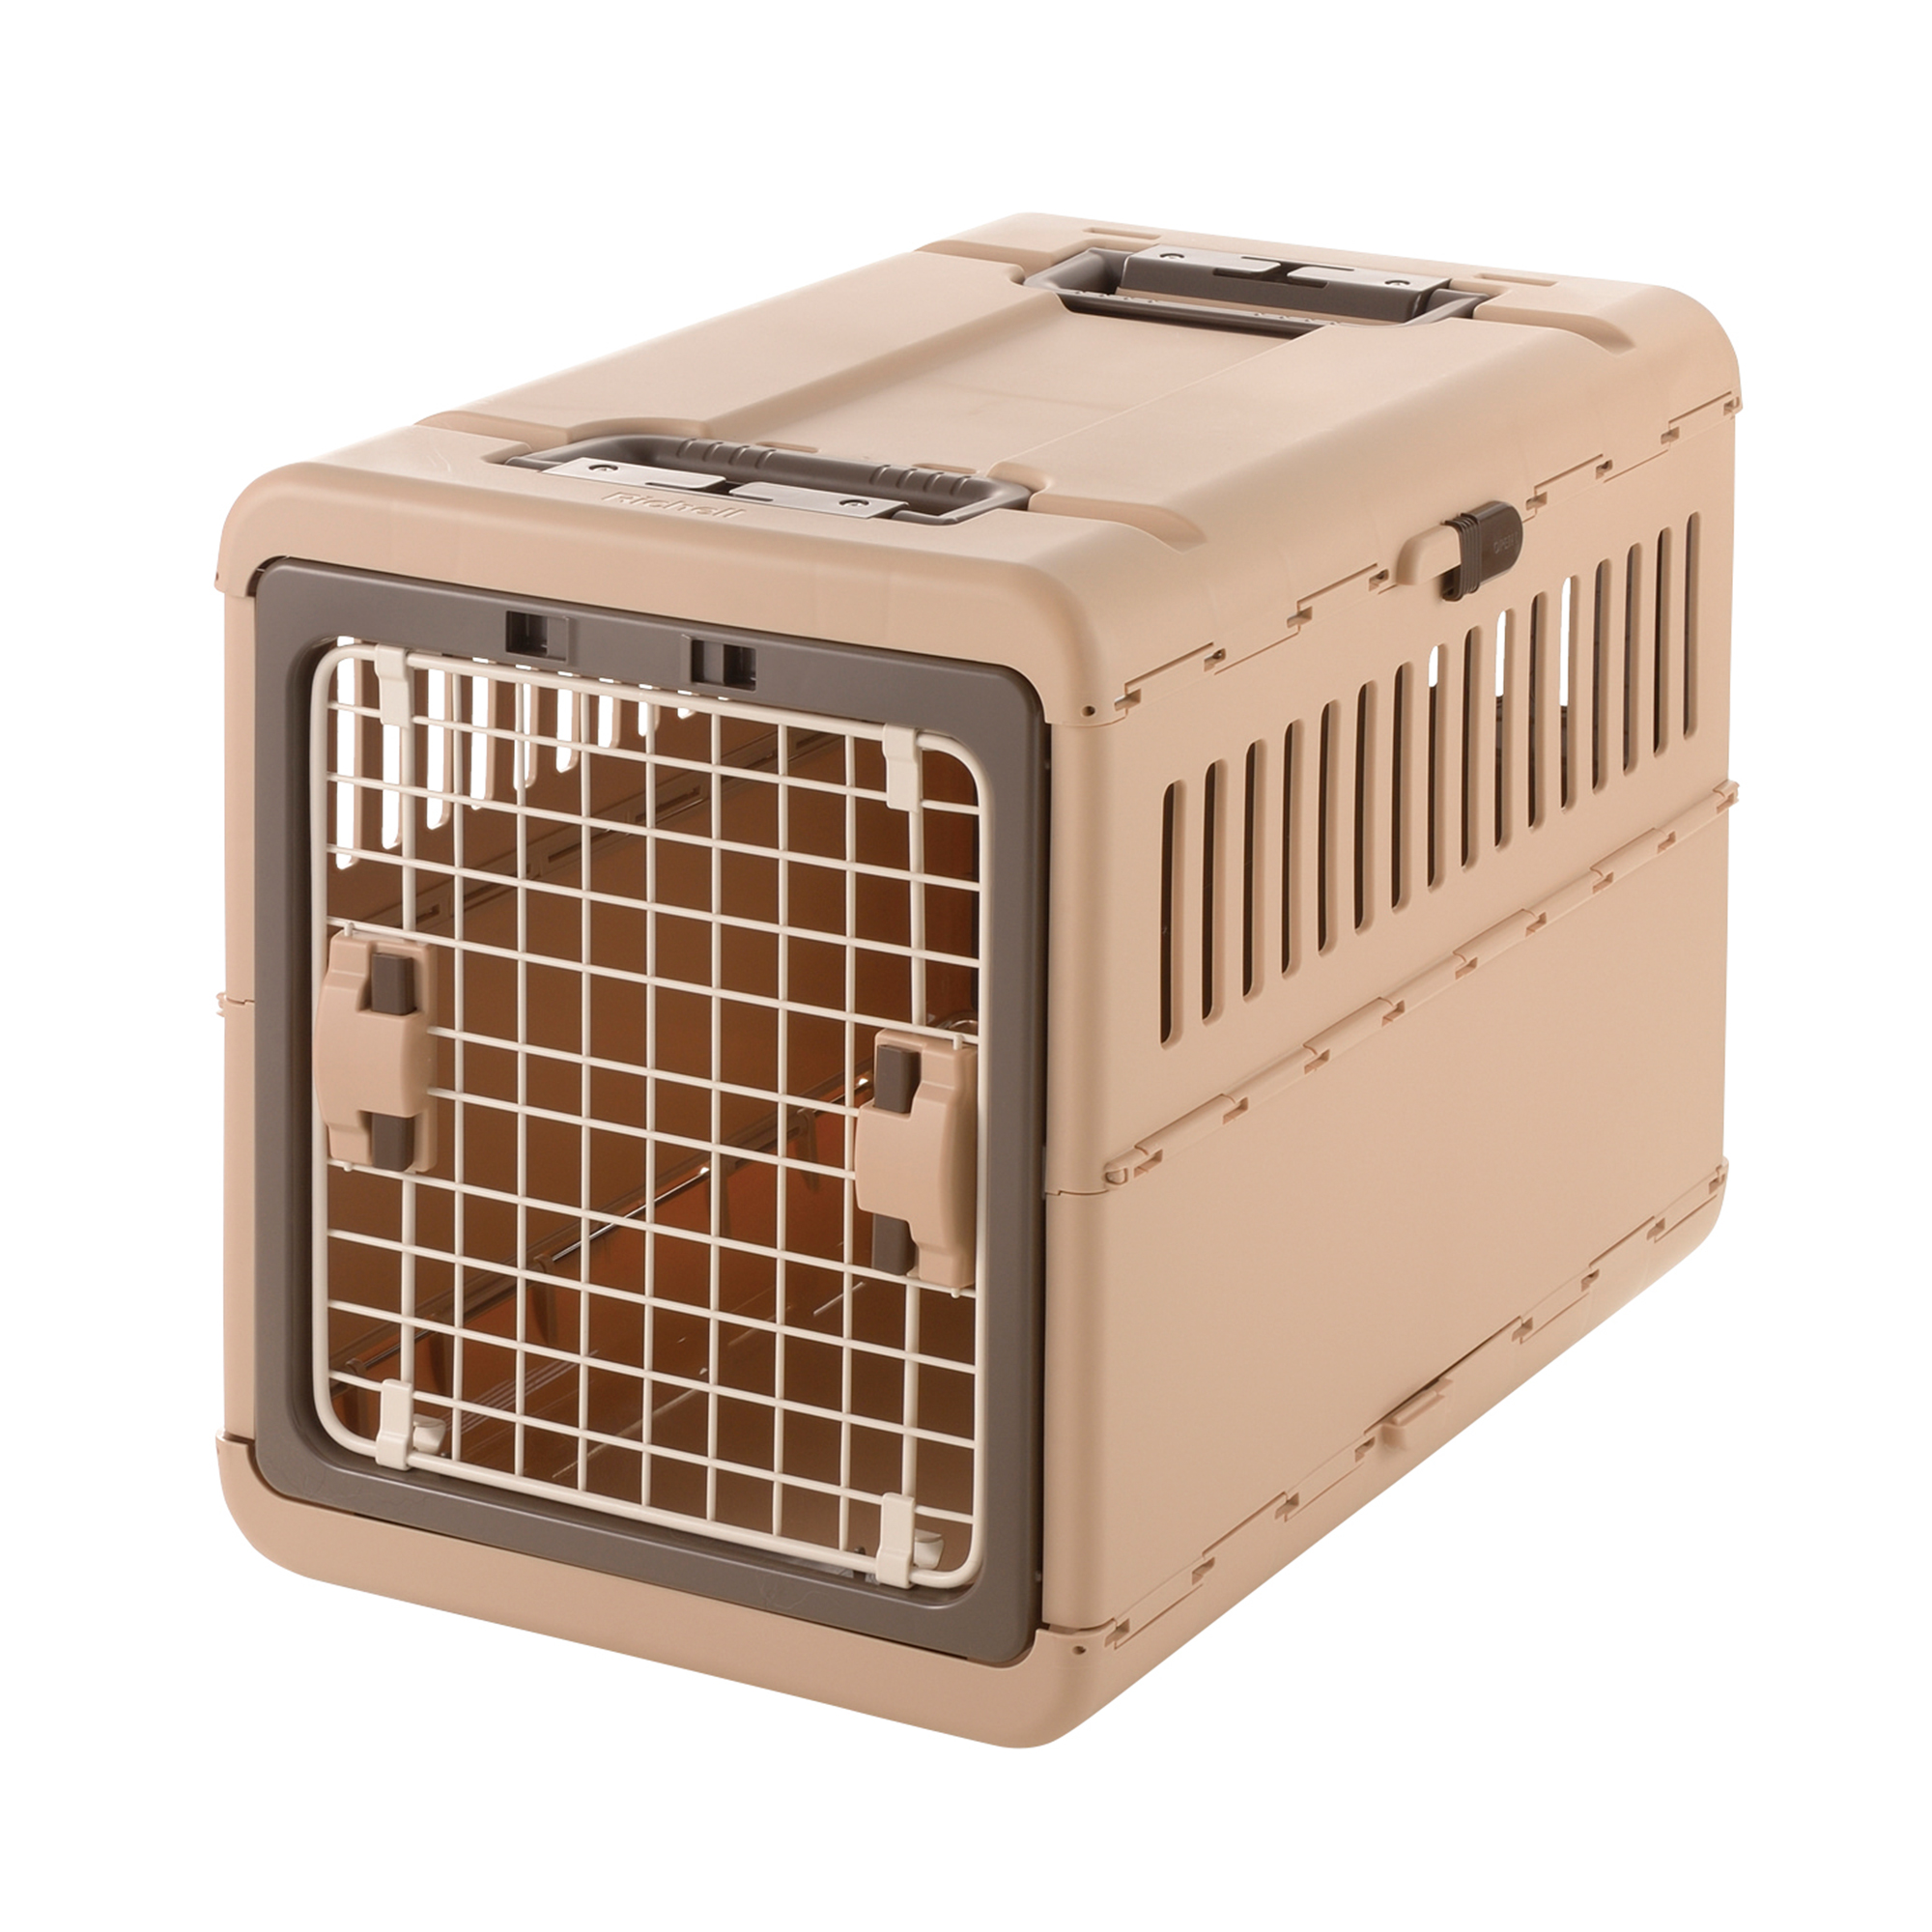 Foldable Pet Carrier, Dog and Cat Kennel